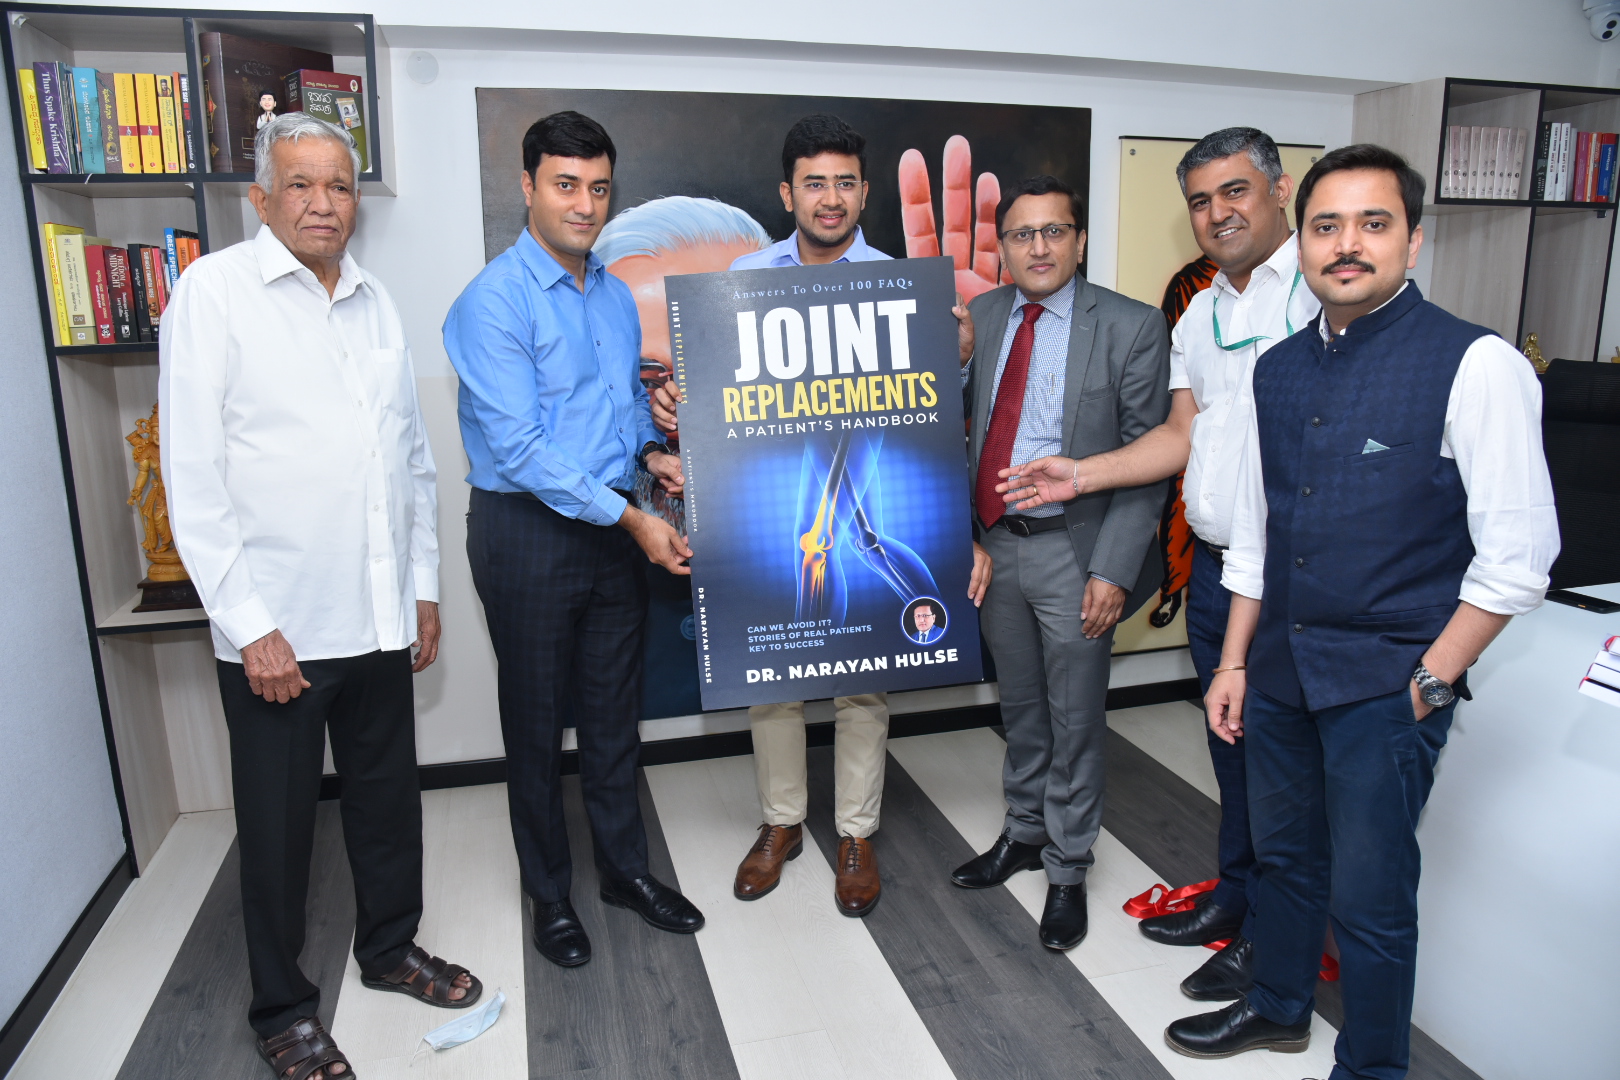 Dr Narayan Hulse, Director of Orthopedics of Fortis Hospital launches a Patient’s Handbook on Joint Replacement